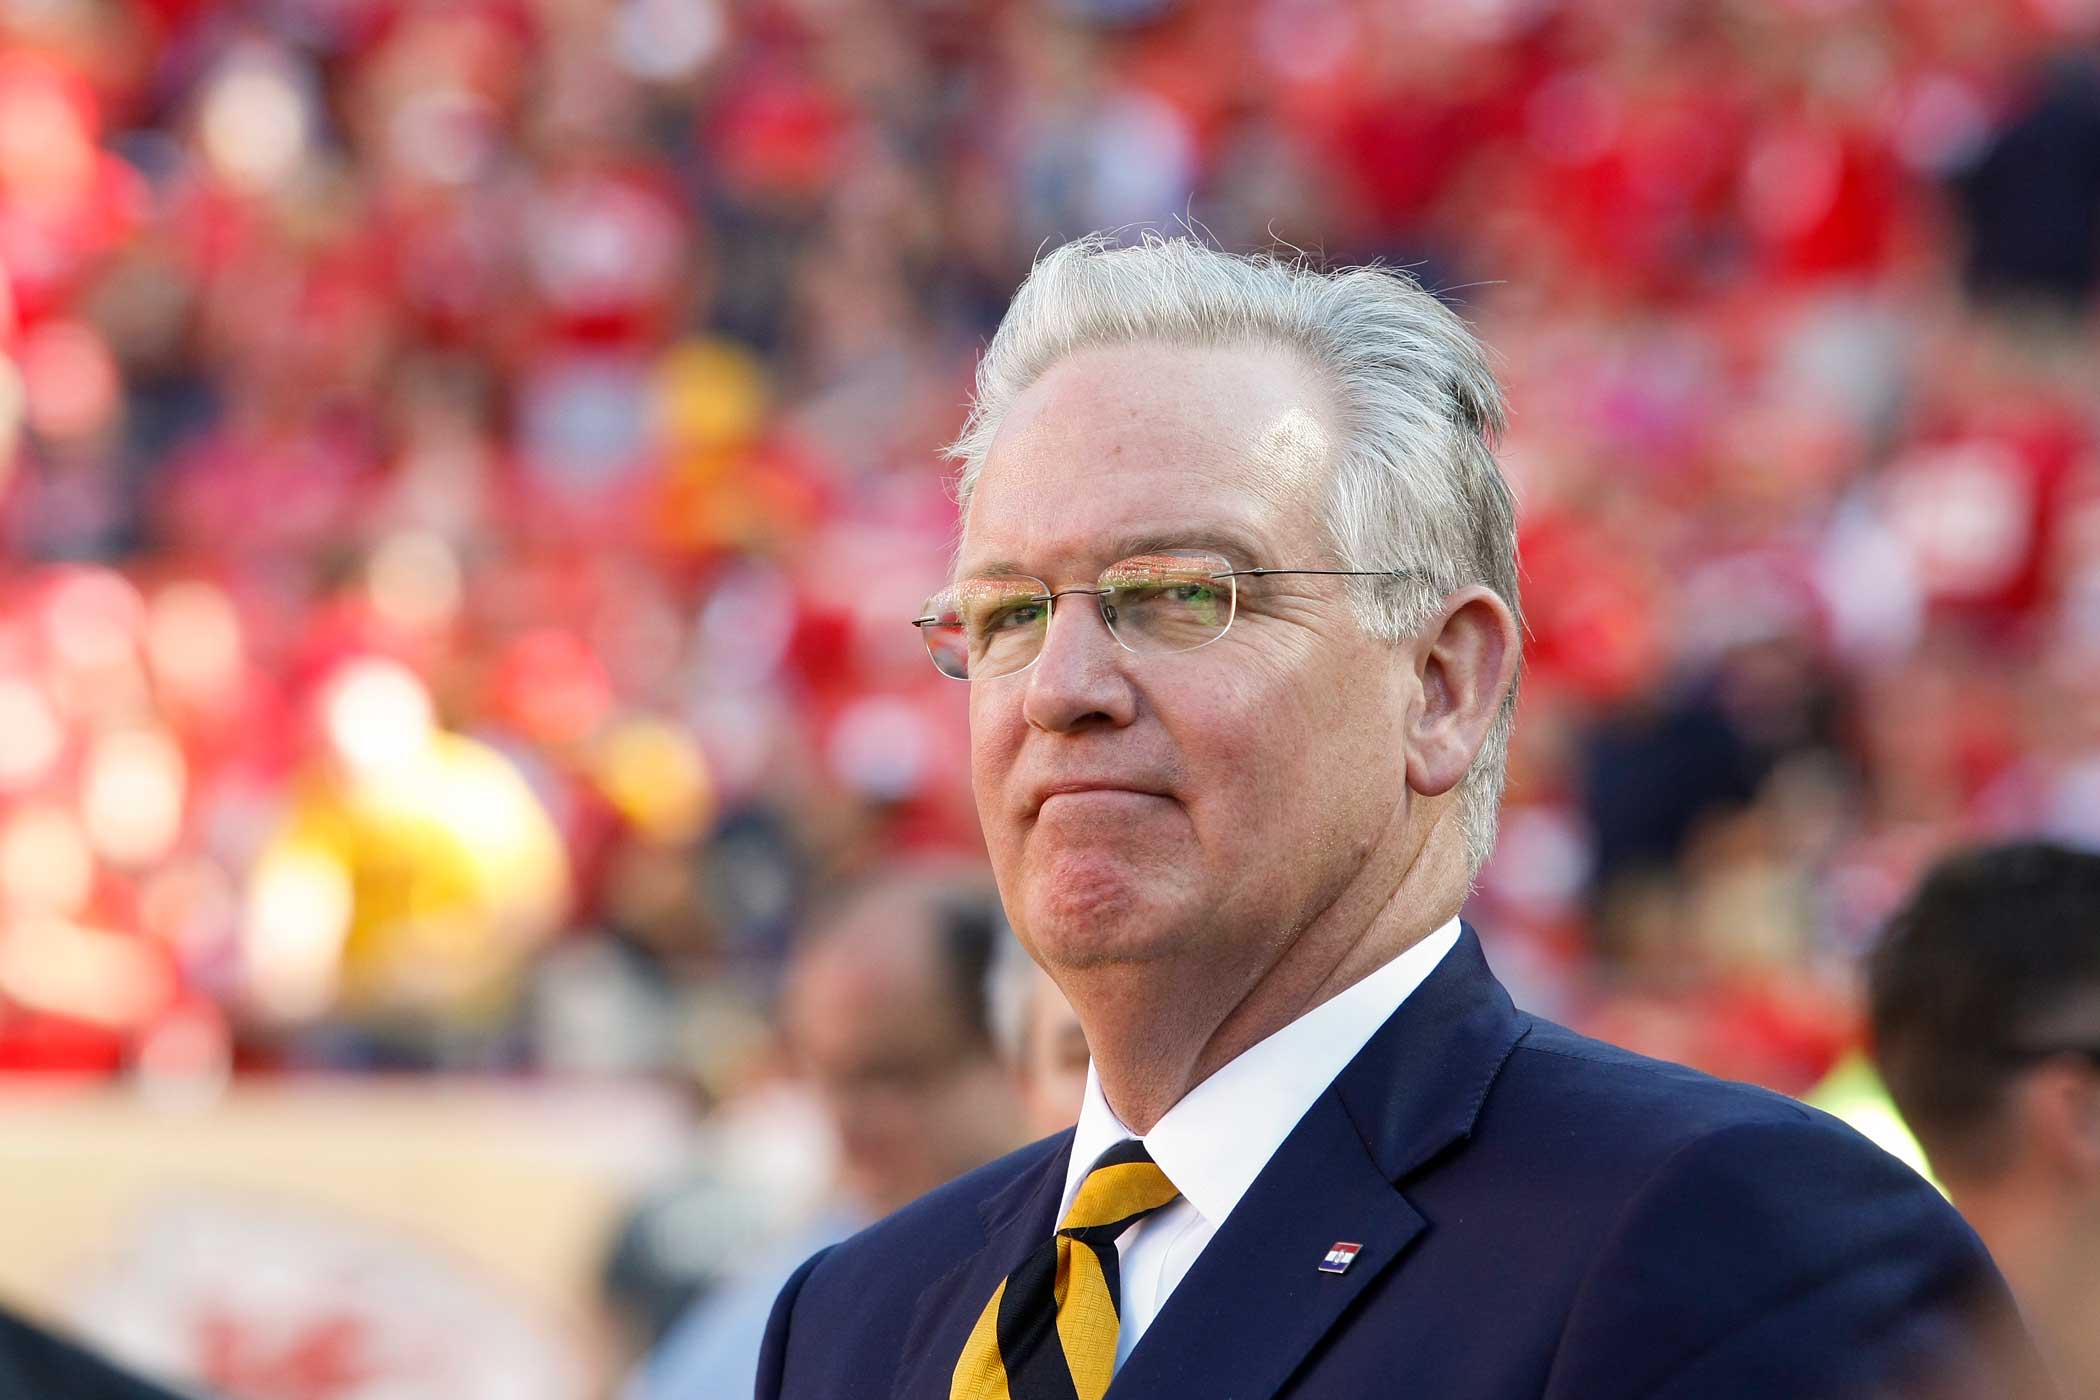 Missouri Gov. Jay Nixon follows the game between the Kansas City Chiefs and the St. Louis Rams in the second half of an NFL football game in Kansas City, Mo., Sunday, Oct. 26, 2014. (Colin E. Braley—AP)